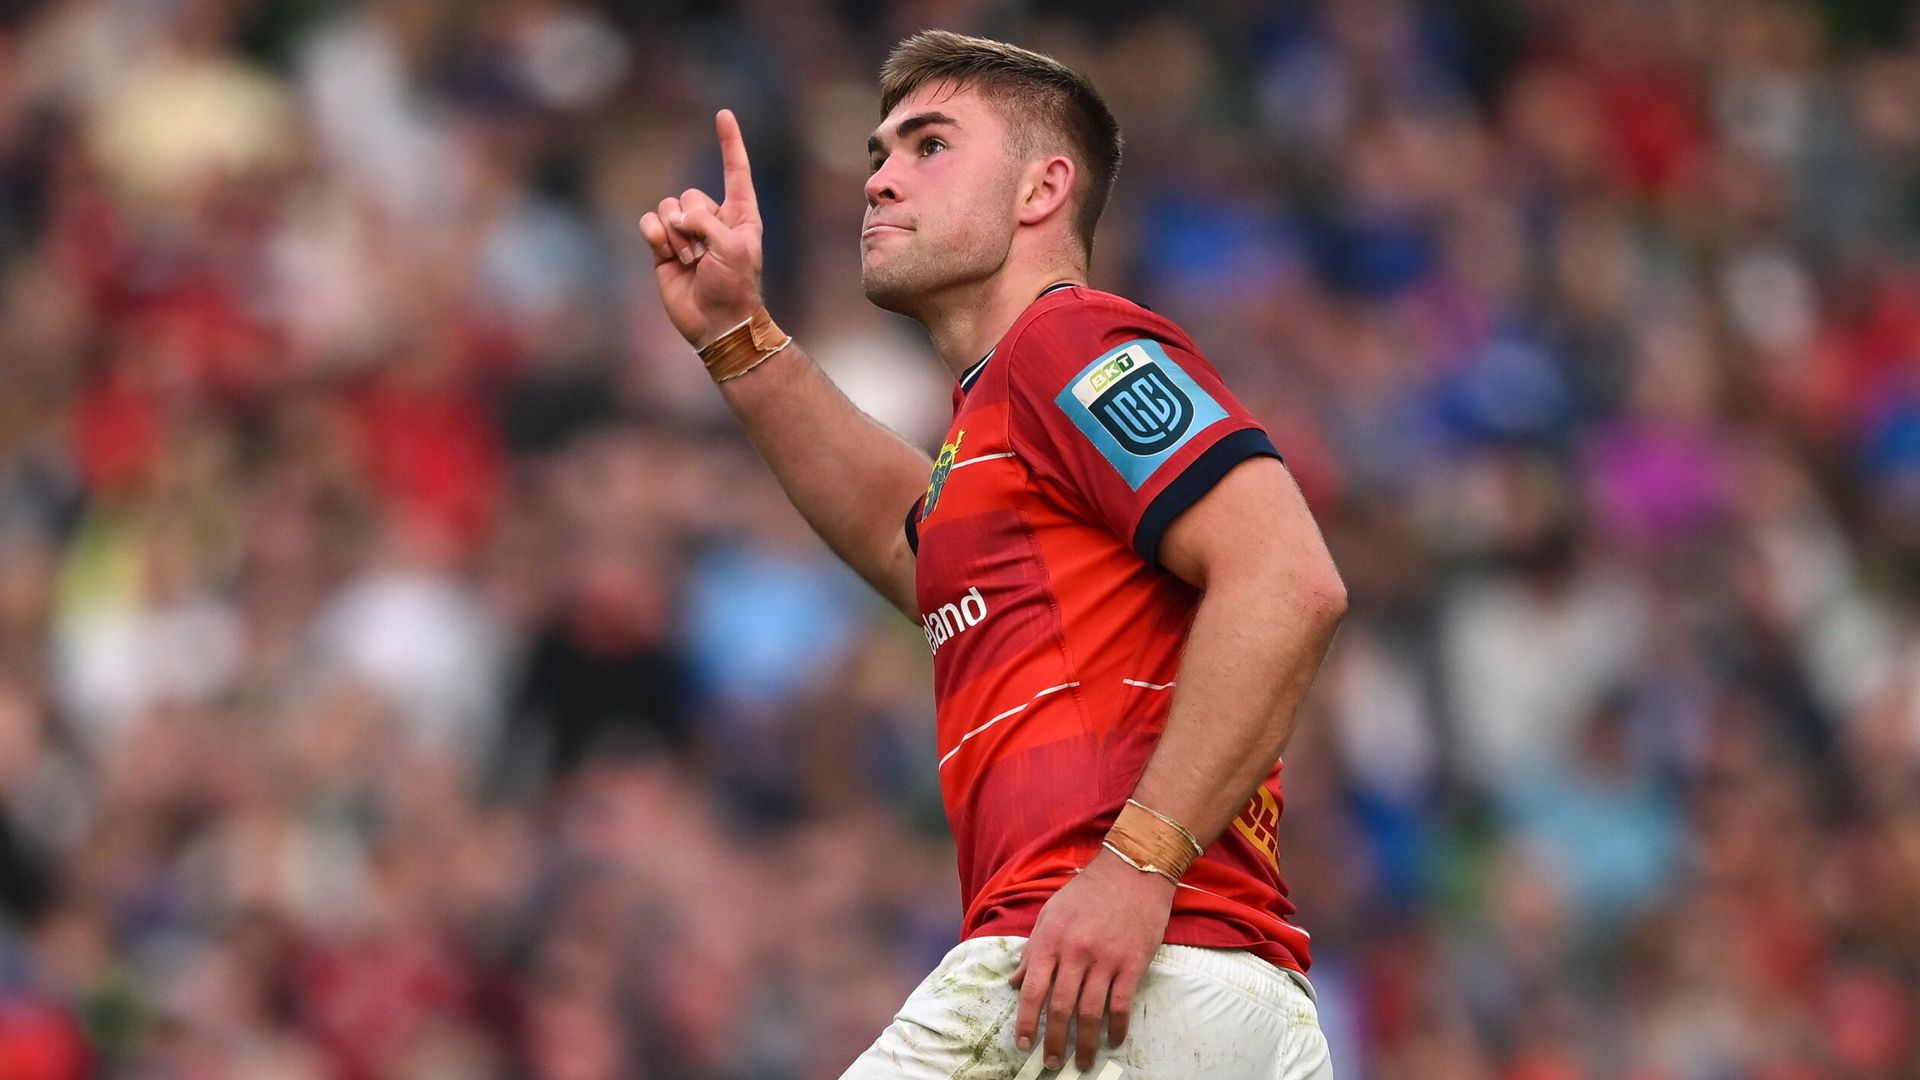 Late Crowley drop-goal sees Munster knock Leinster out of URC semis in Dublin